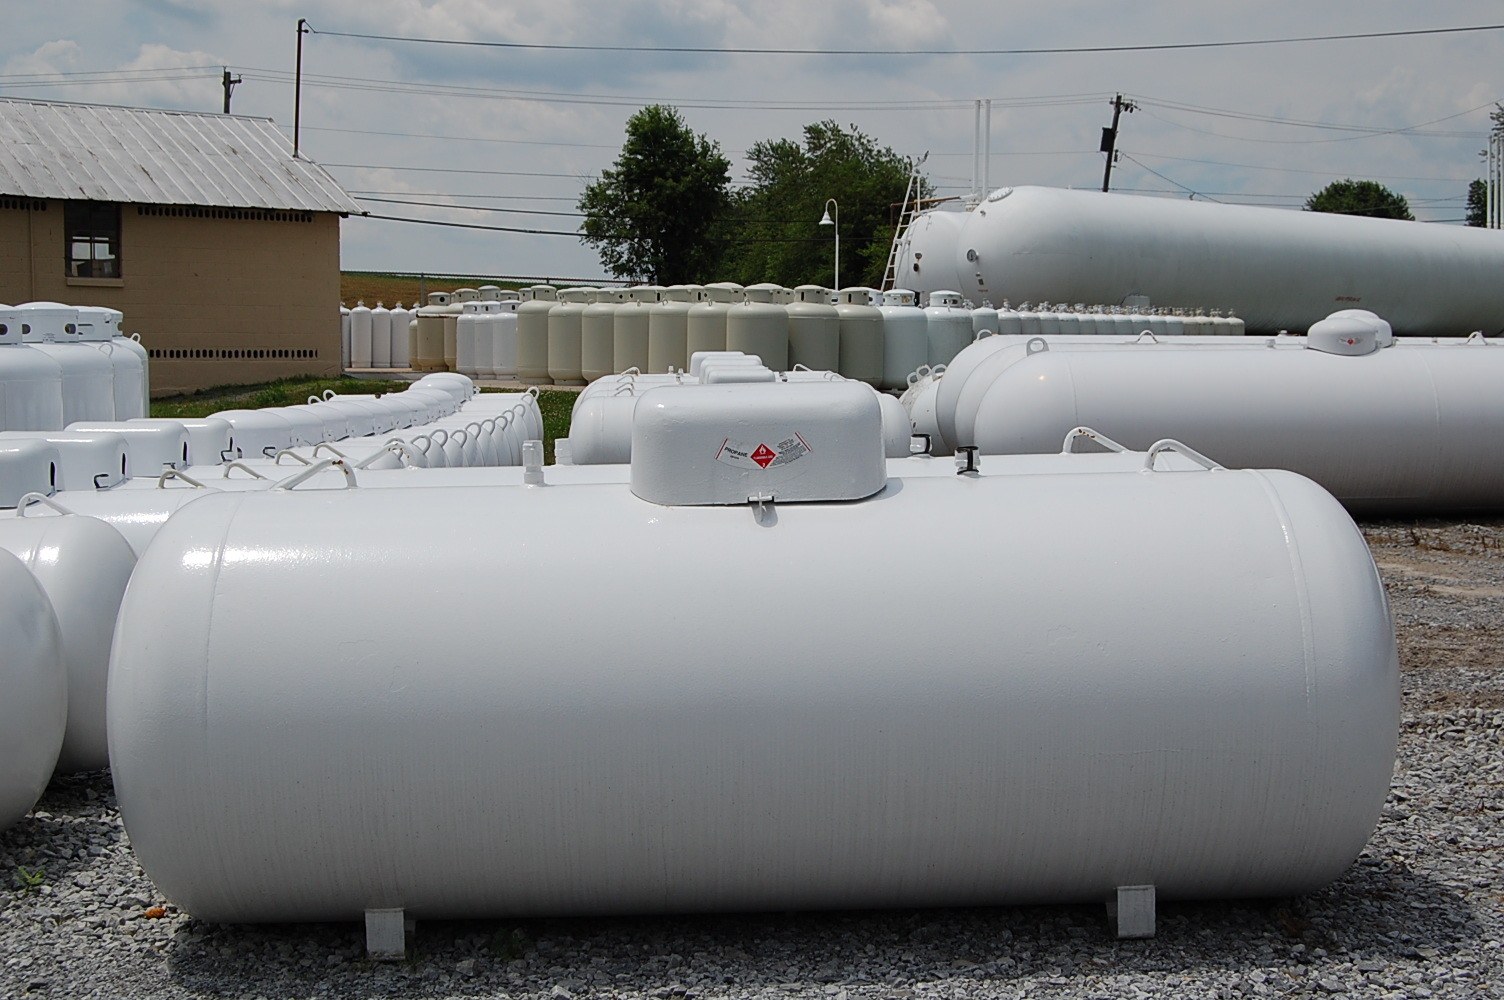 Choose the Propane Tank Size that Fits Your Needs